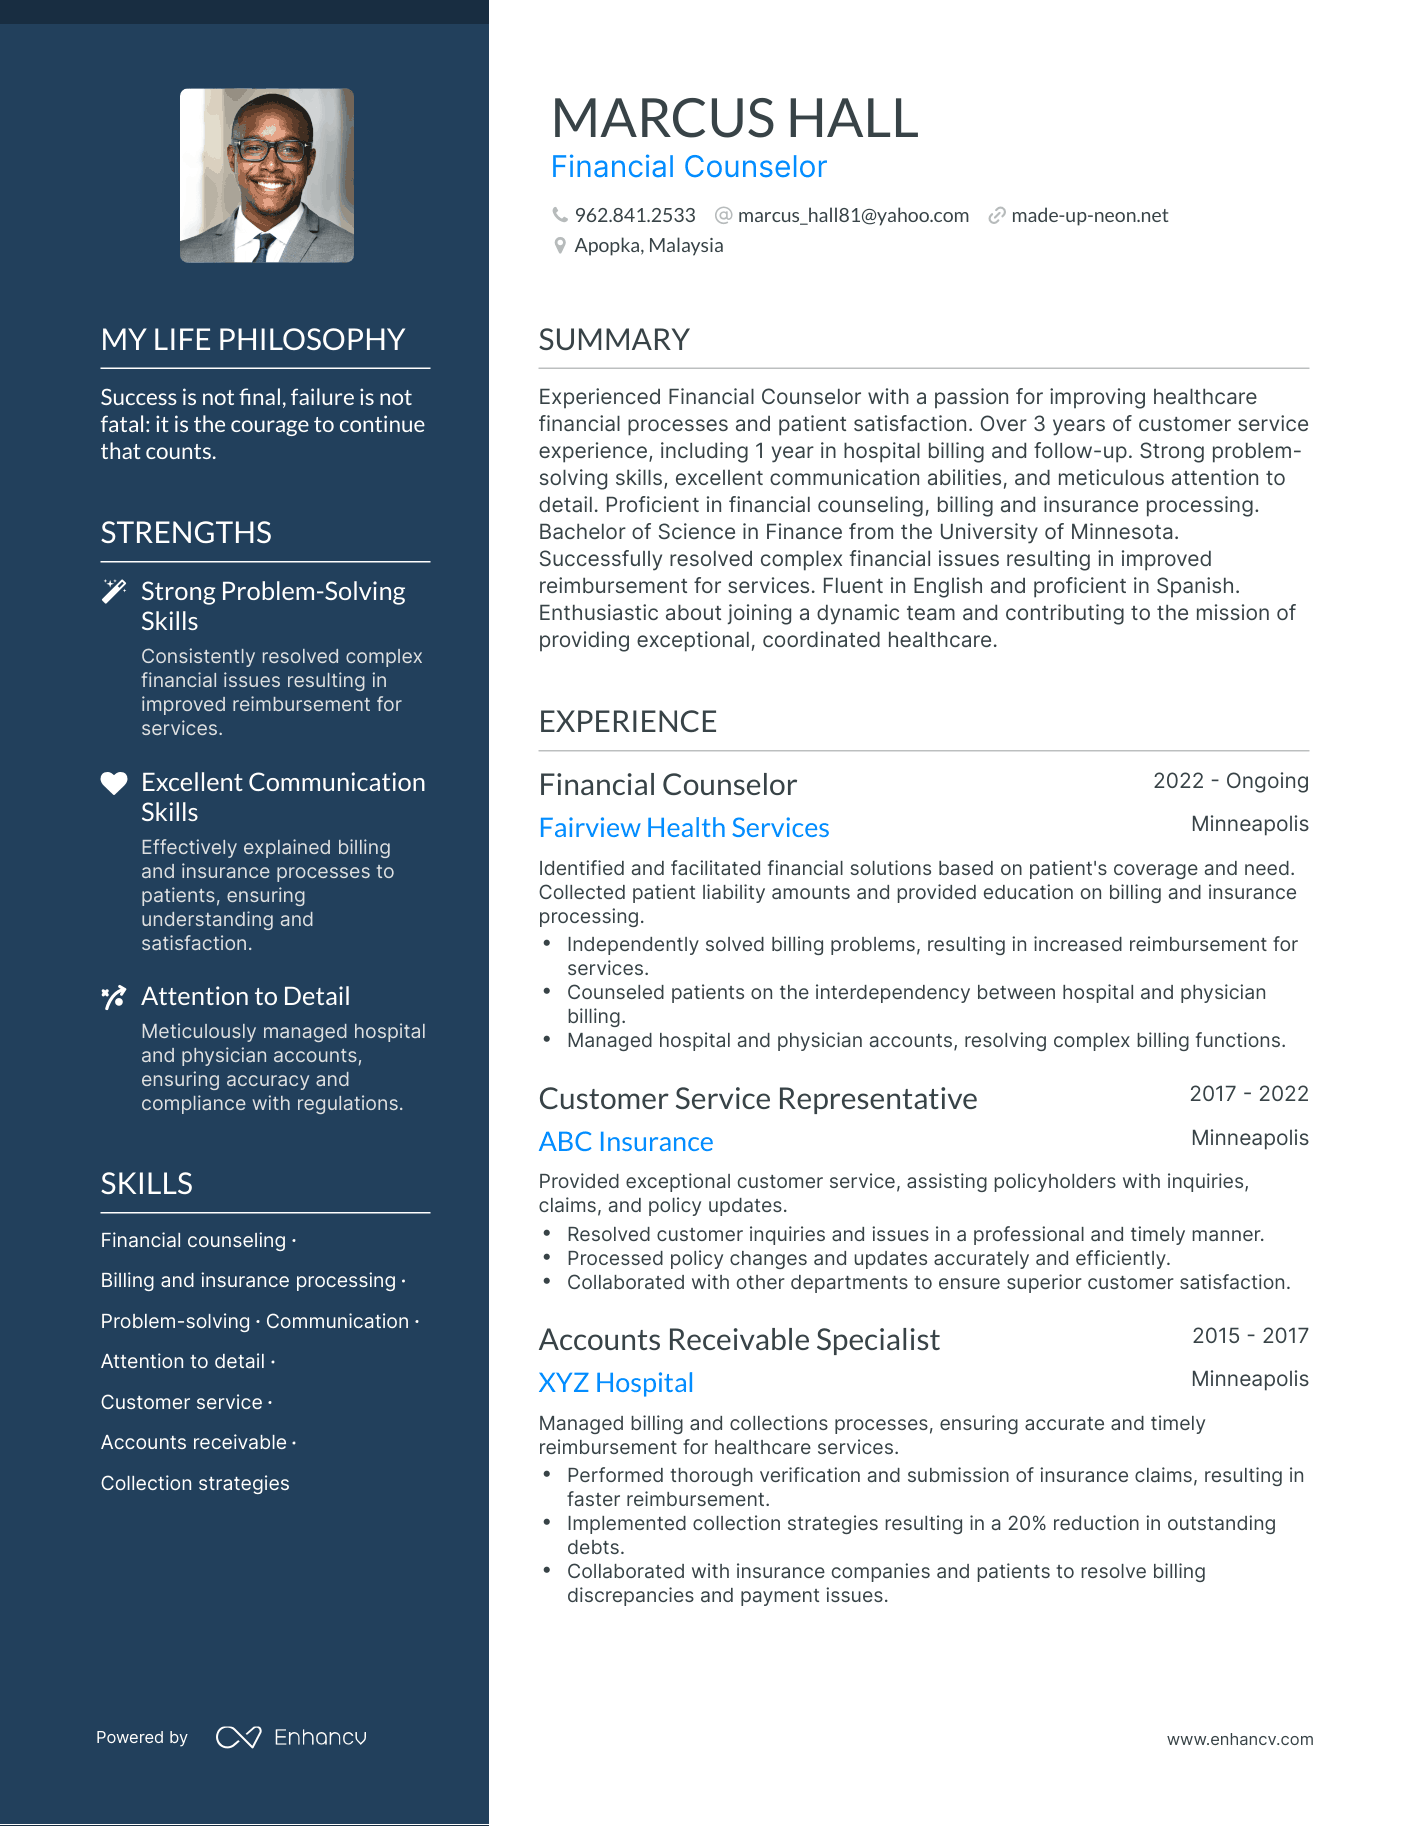 Financial Counselor resume example